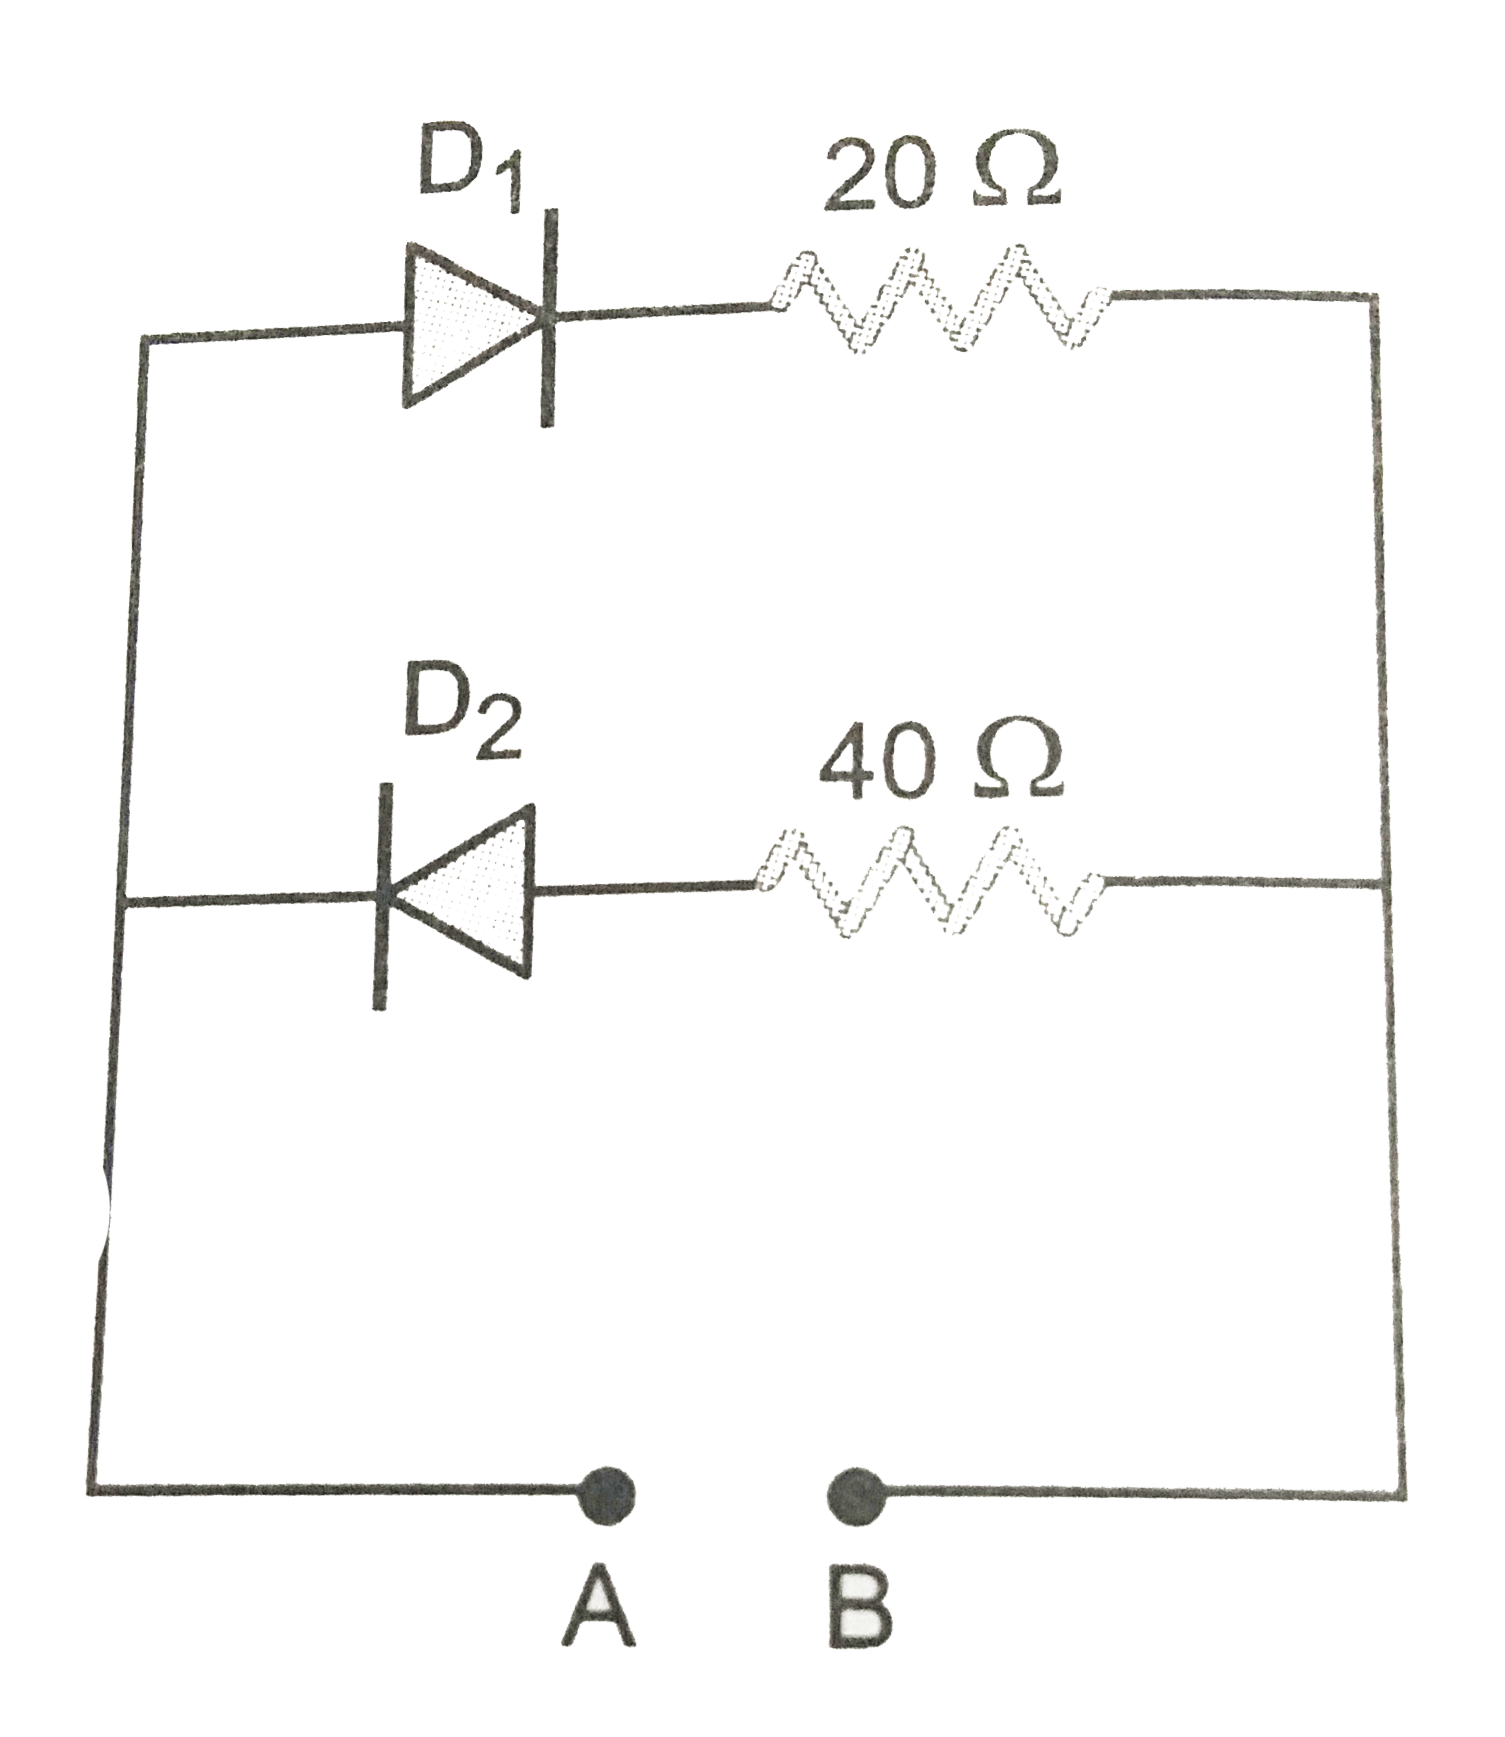 A battery of 1.5 V may be connected across the point A and B as shown in Fig . What is the current drawn from the battery if the positive terminal of the battery is connected to  the point A and  the point B. The junction diodes D(1) and D(2) used are ideal diodes.